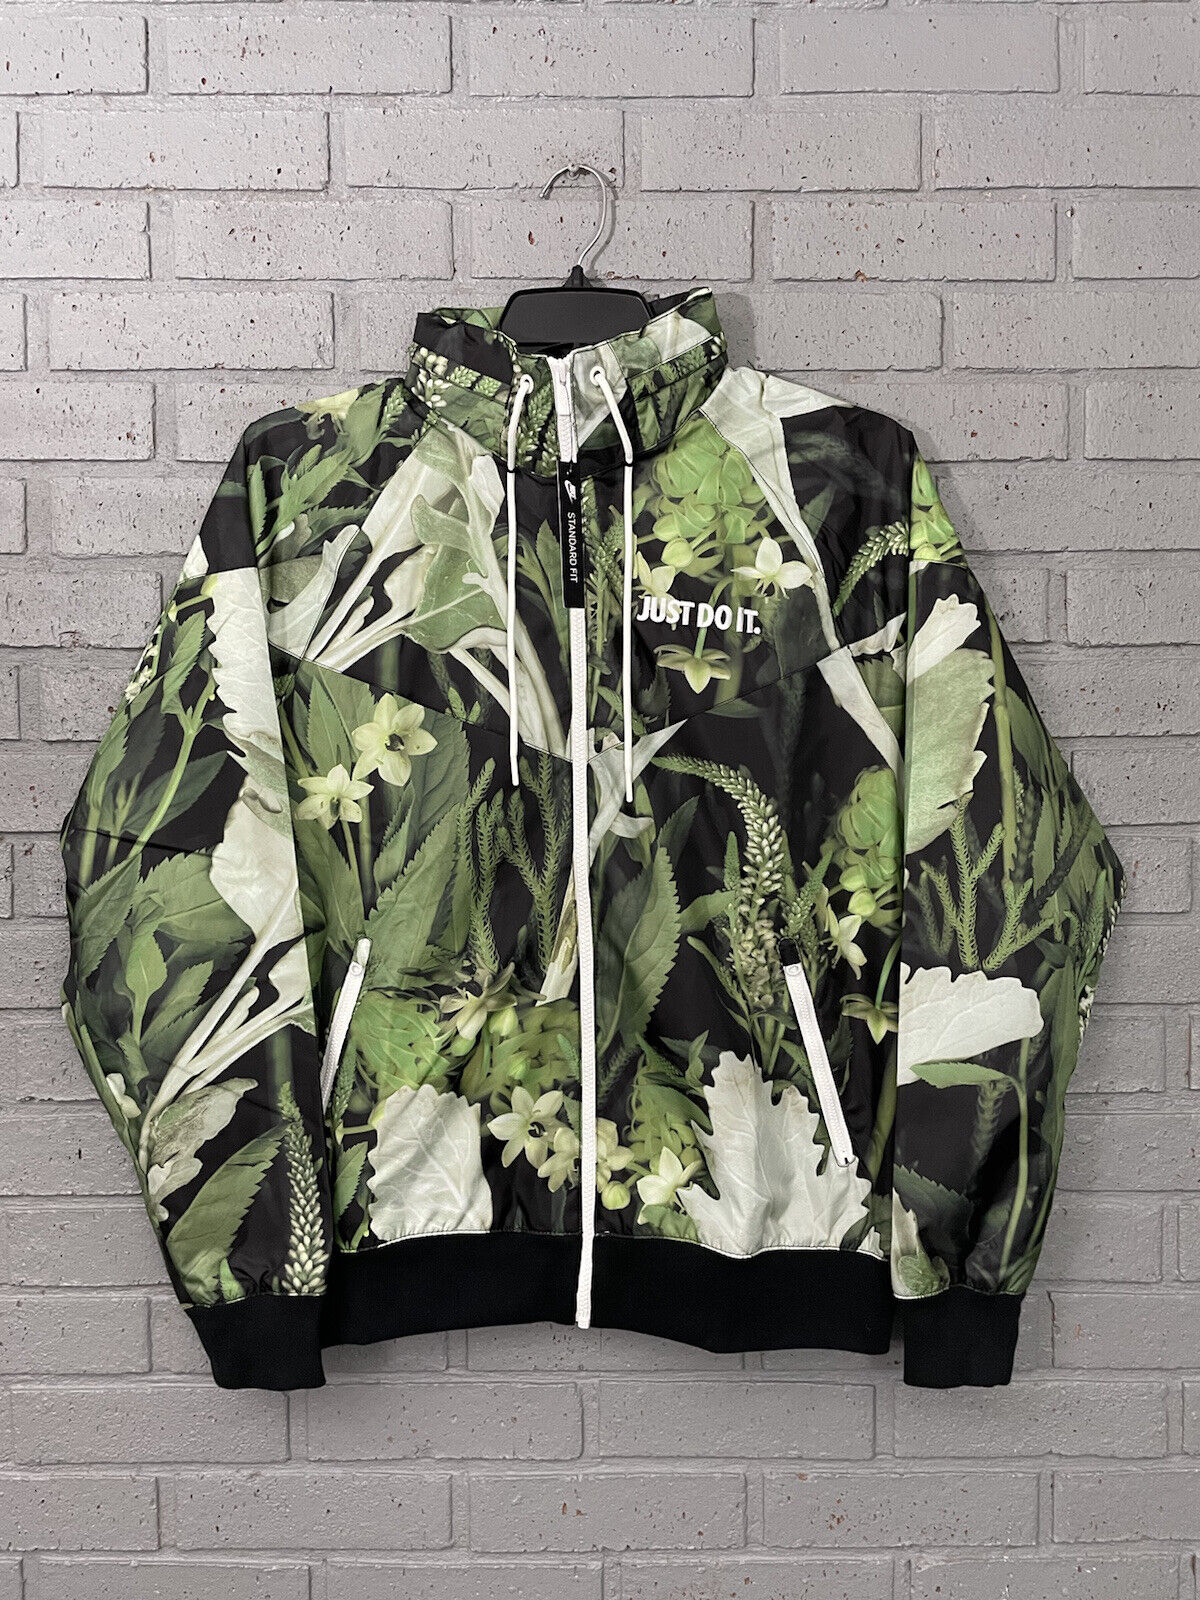 $125 Mens Size S Nike Green Floral Just Do It Windrunner Jacket CK8075-083  Small